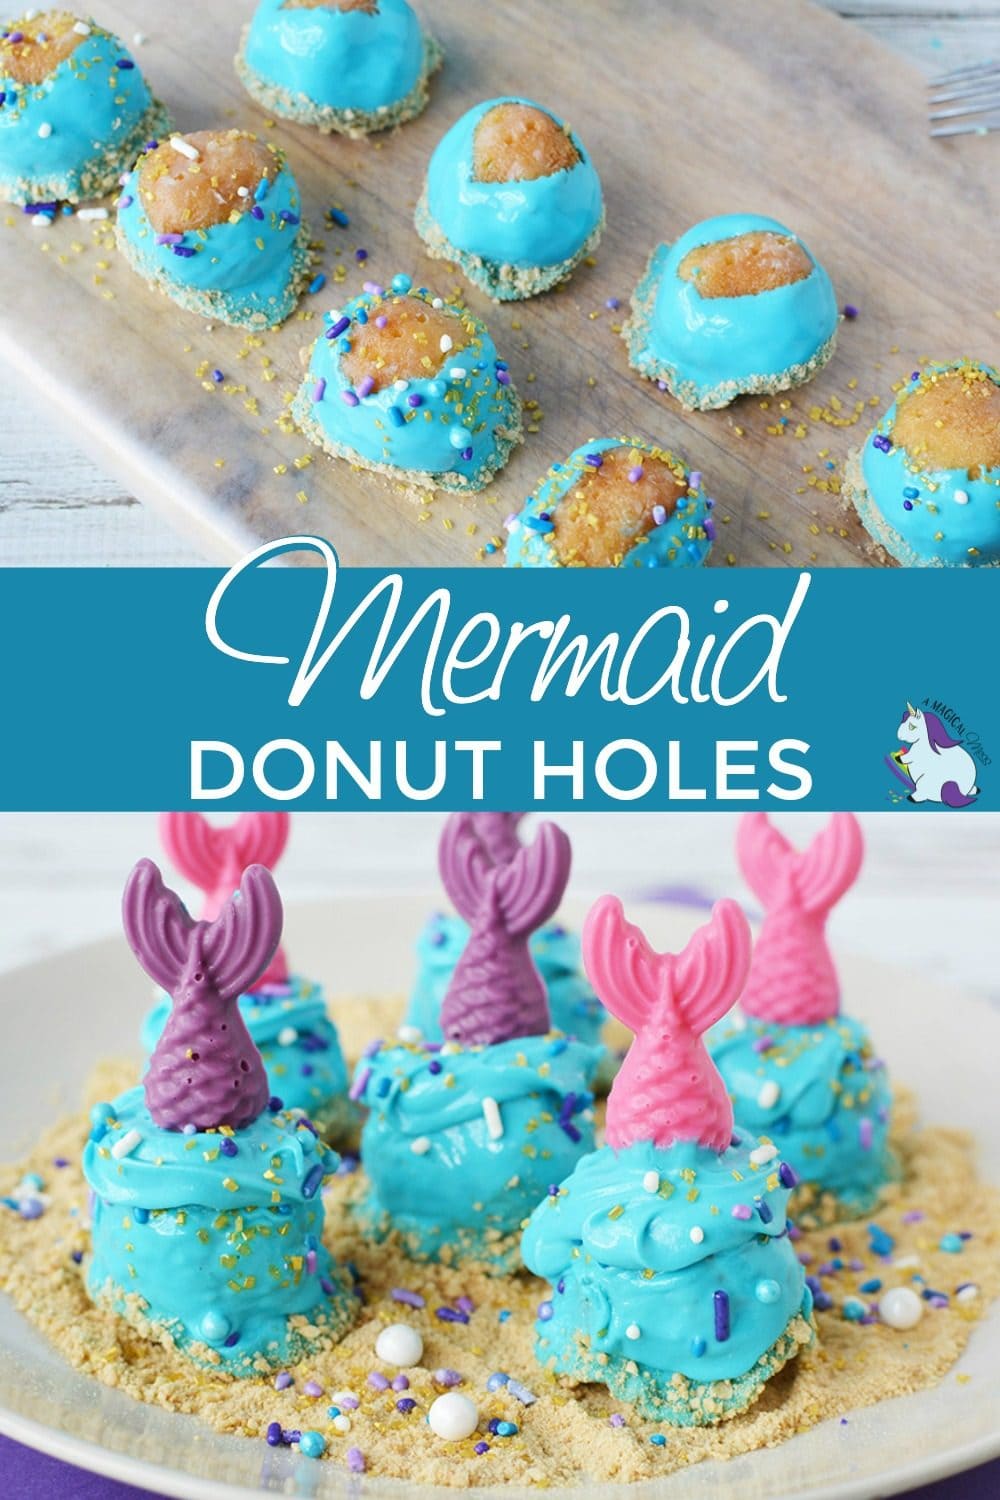 Donut holes decorated for a mermaid party